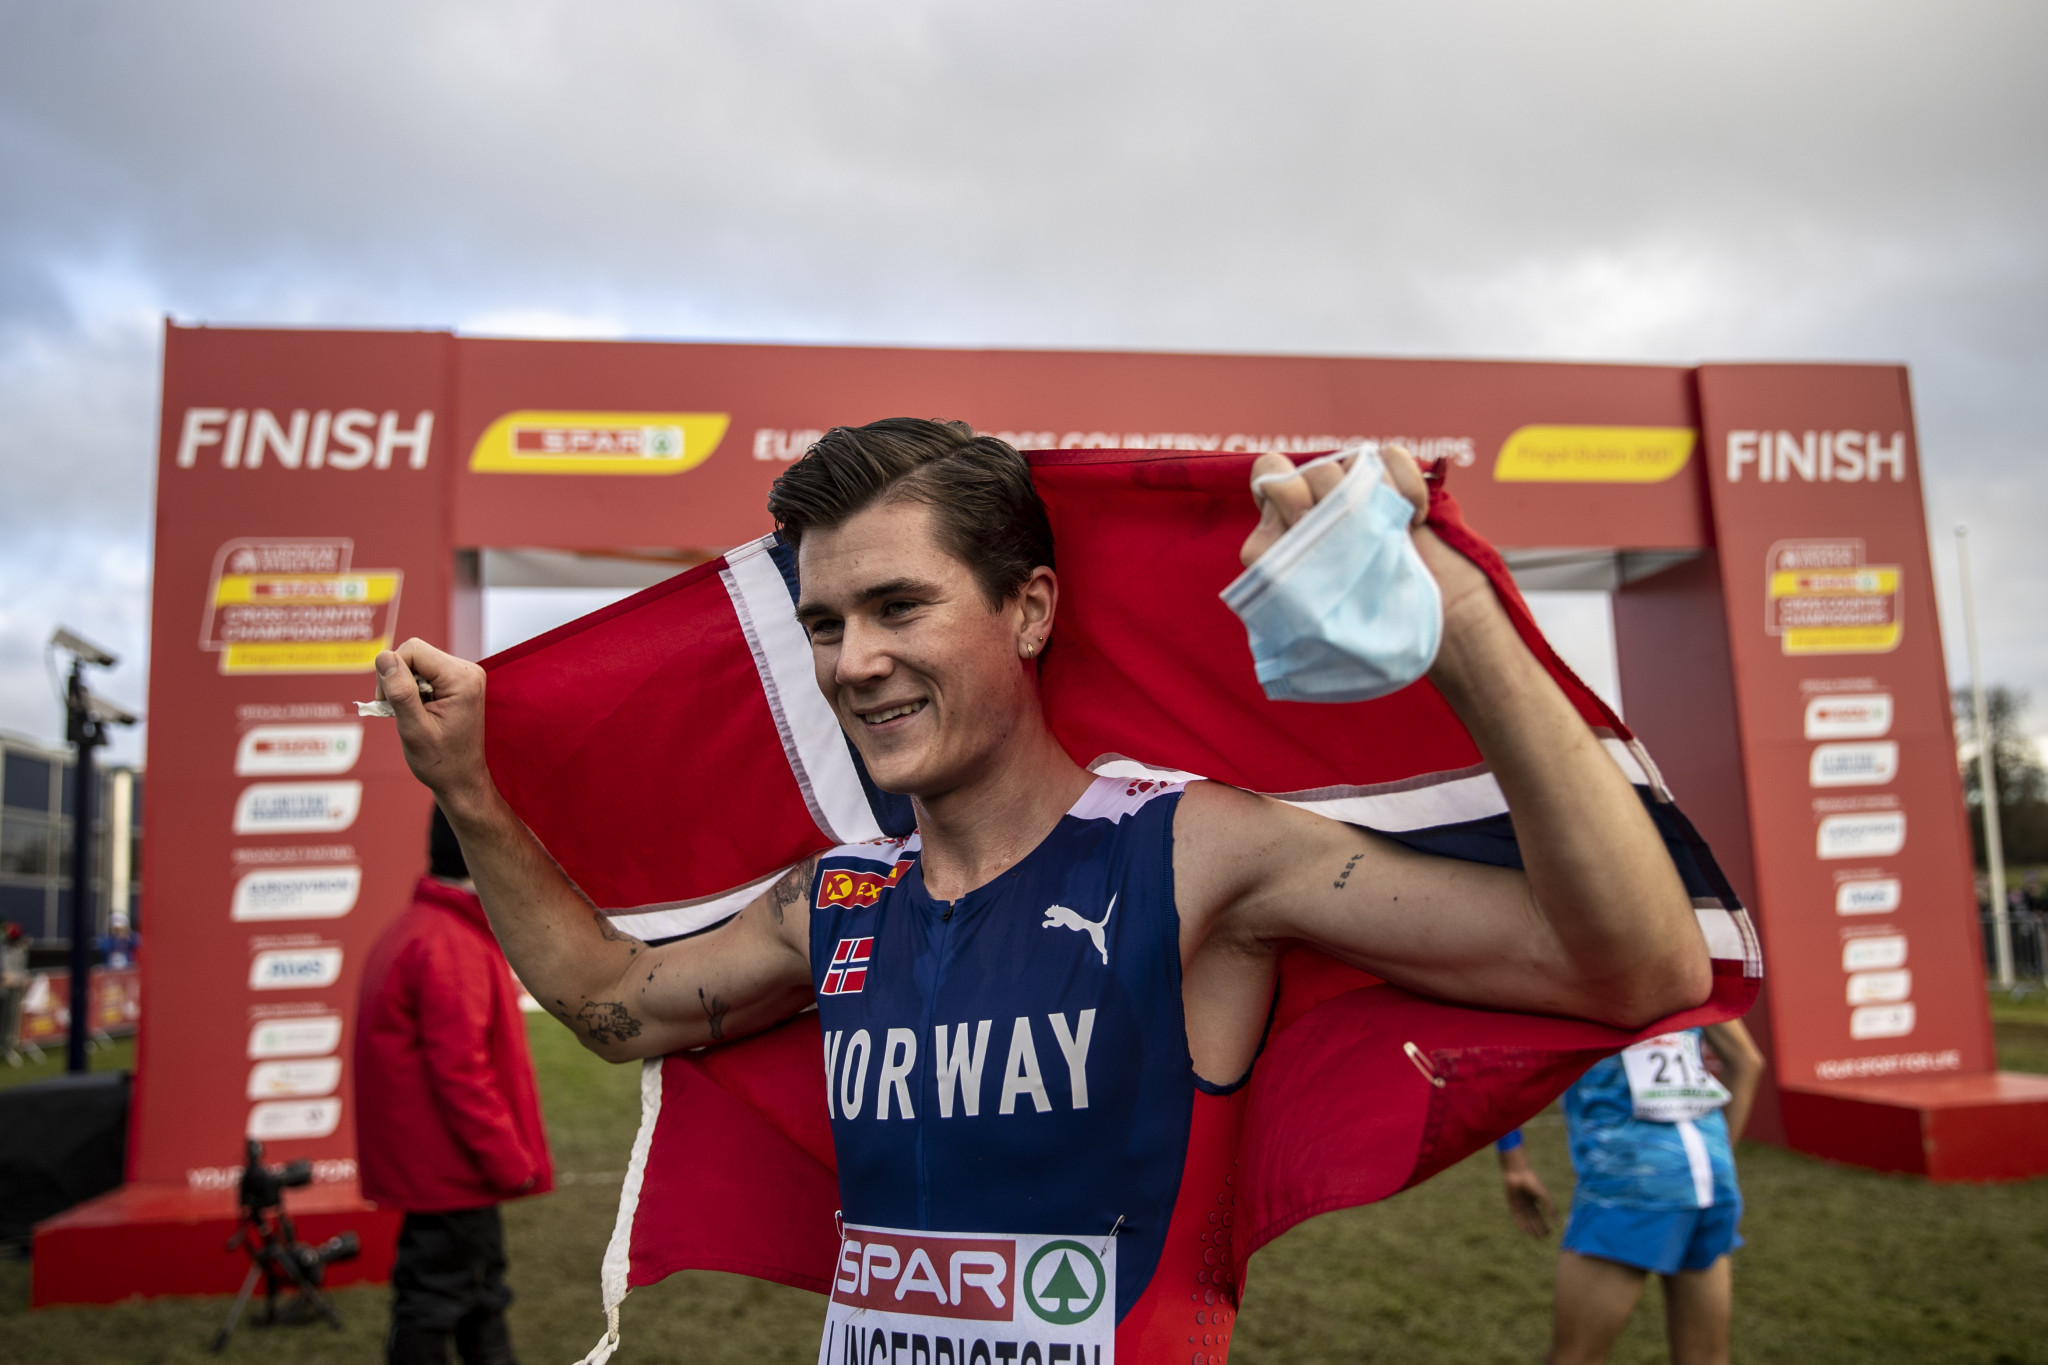 Norwegians Ingebrigtsen and Grøvdal eyeing title defence at European Cross Country Championships